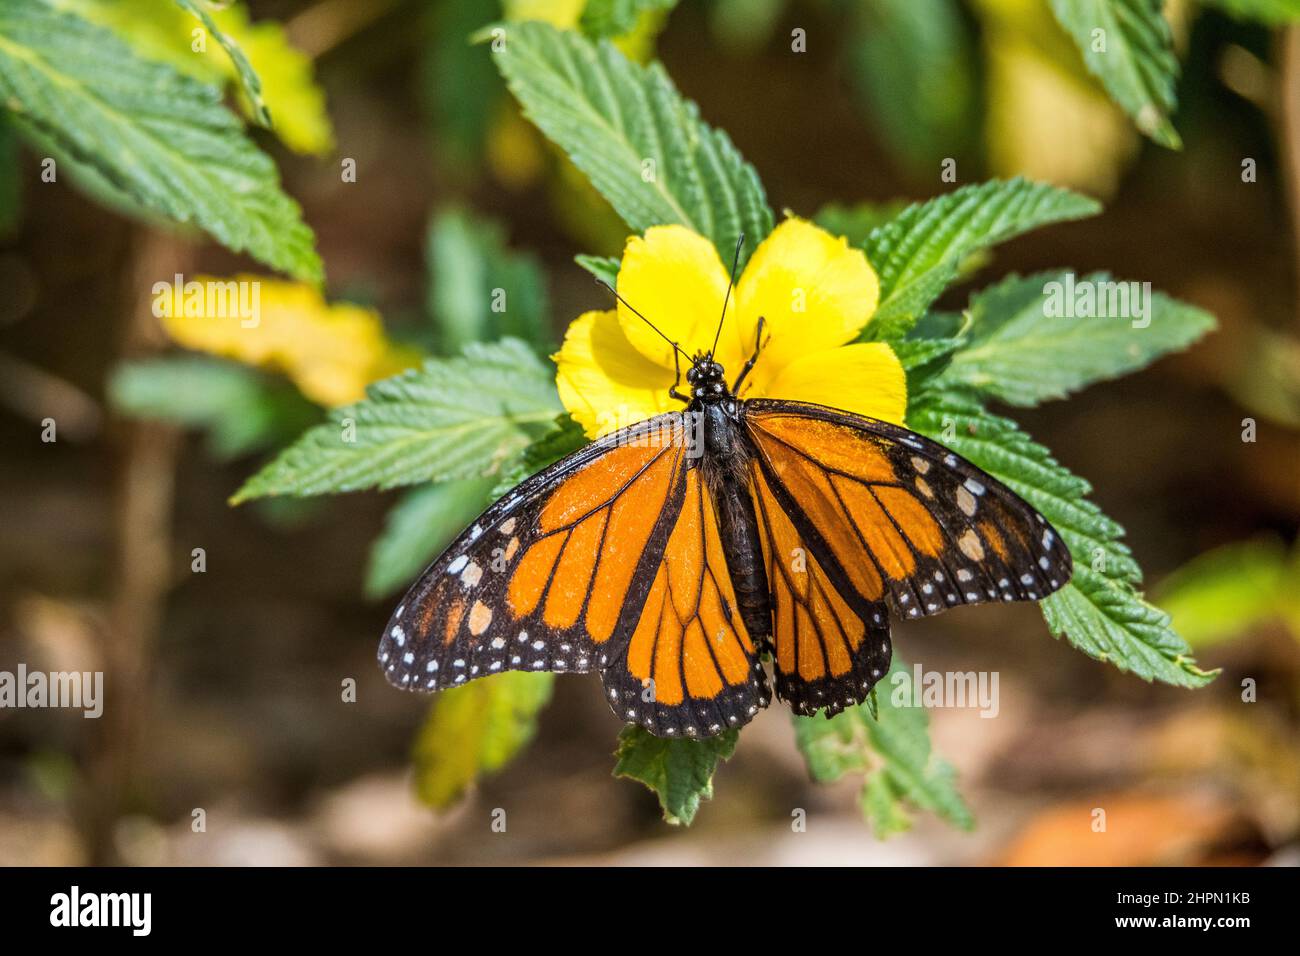 The monarch butterfly or simply monarch (Danaus plexippus) is a milkweed butterfly (subfamily Danainae) in the family Nymphalidae. Stock Photo